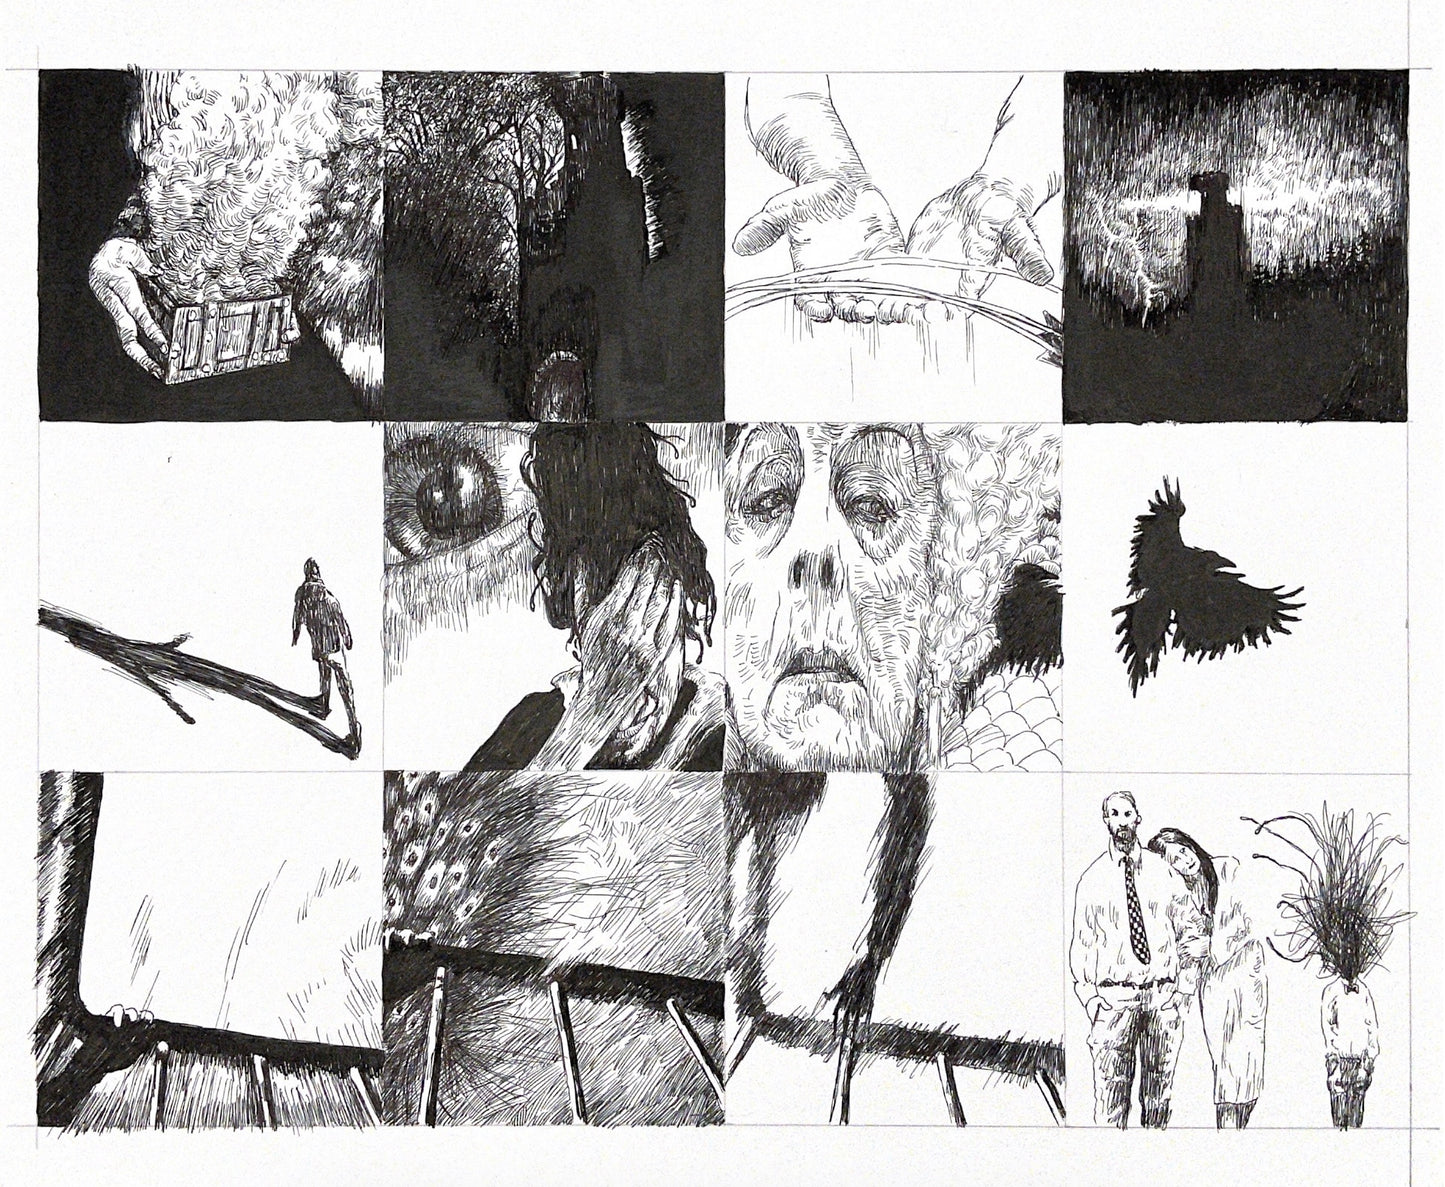 Graphic novel panels, featuring ink drawings, birds and symbolism.